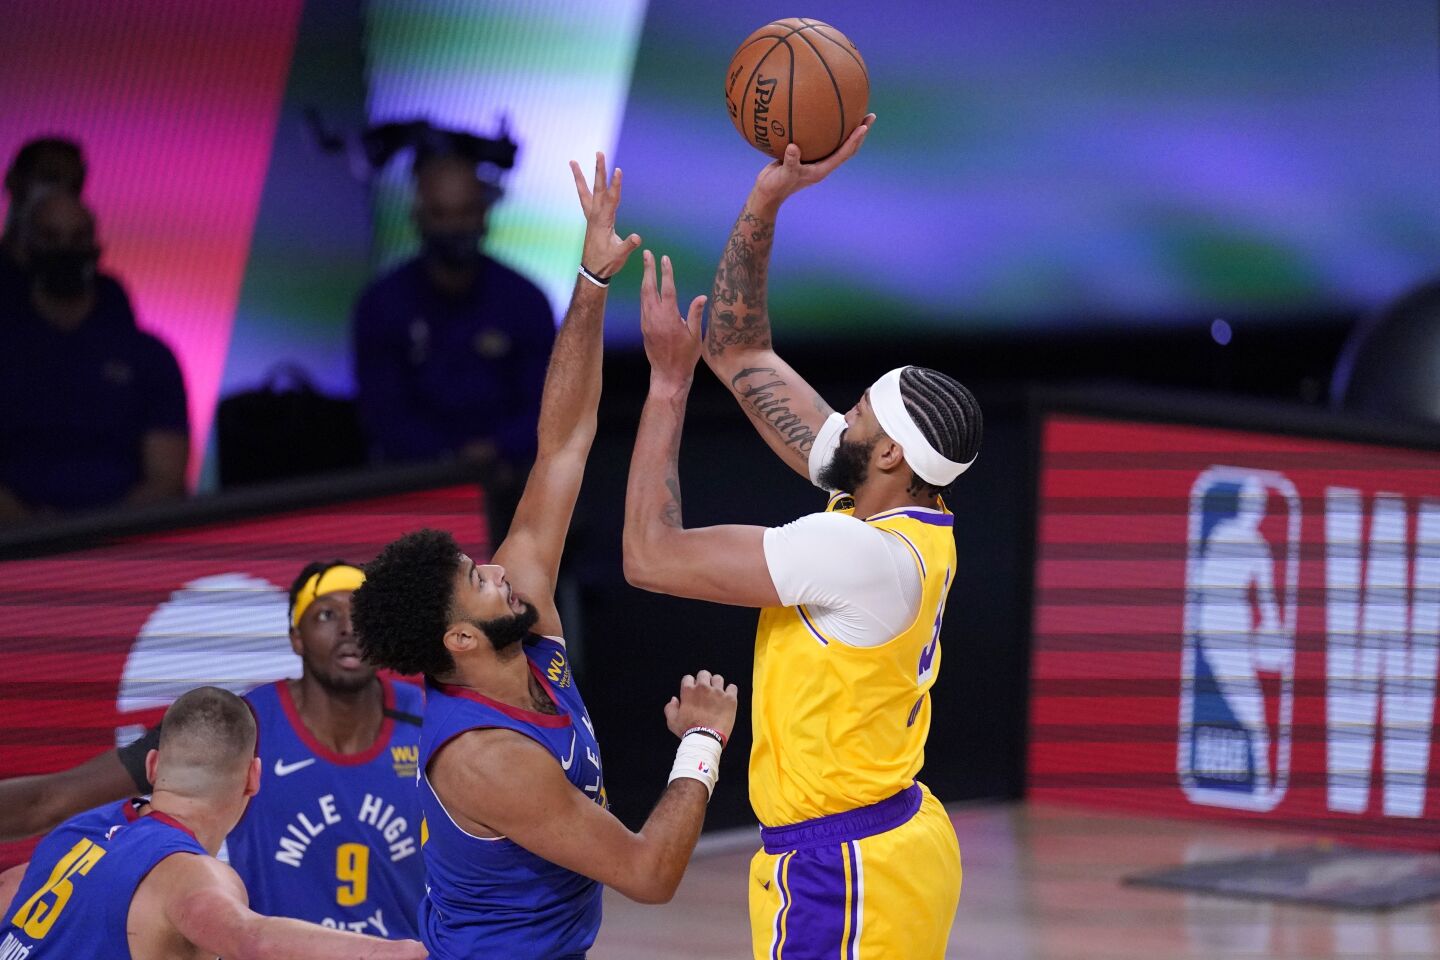 Lakers forward Anthony Davis elevates for a shot over Nuggets guard Jamal Murray during Game 1.